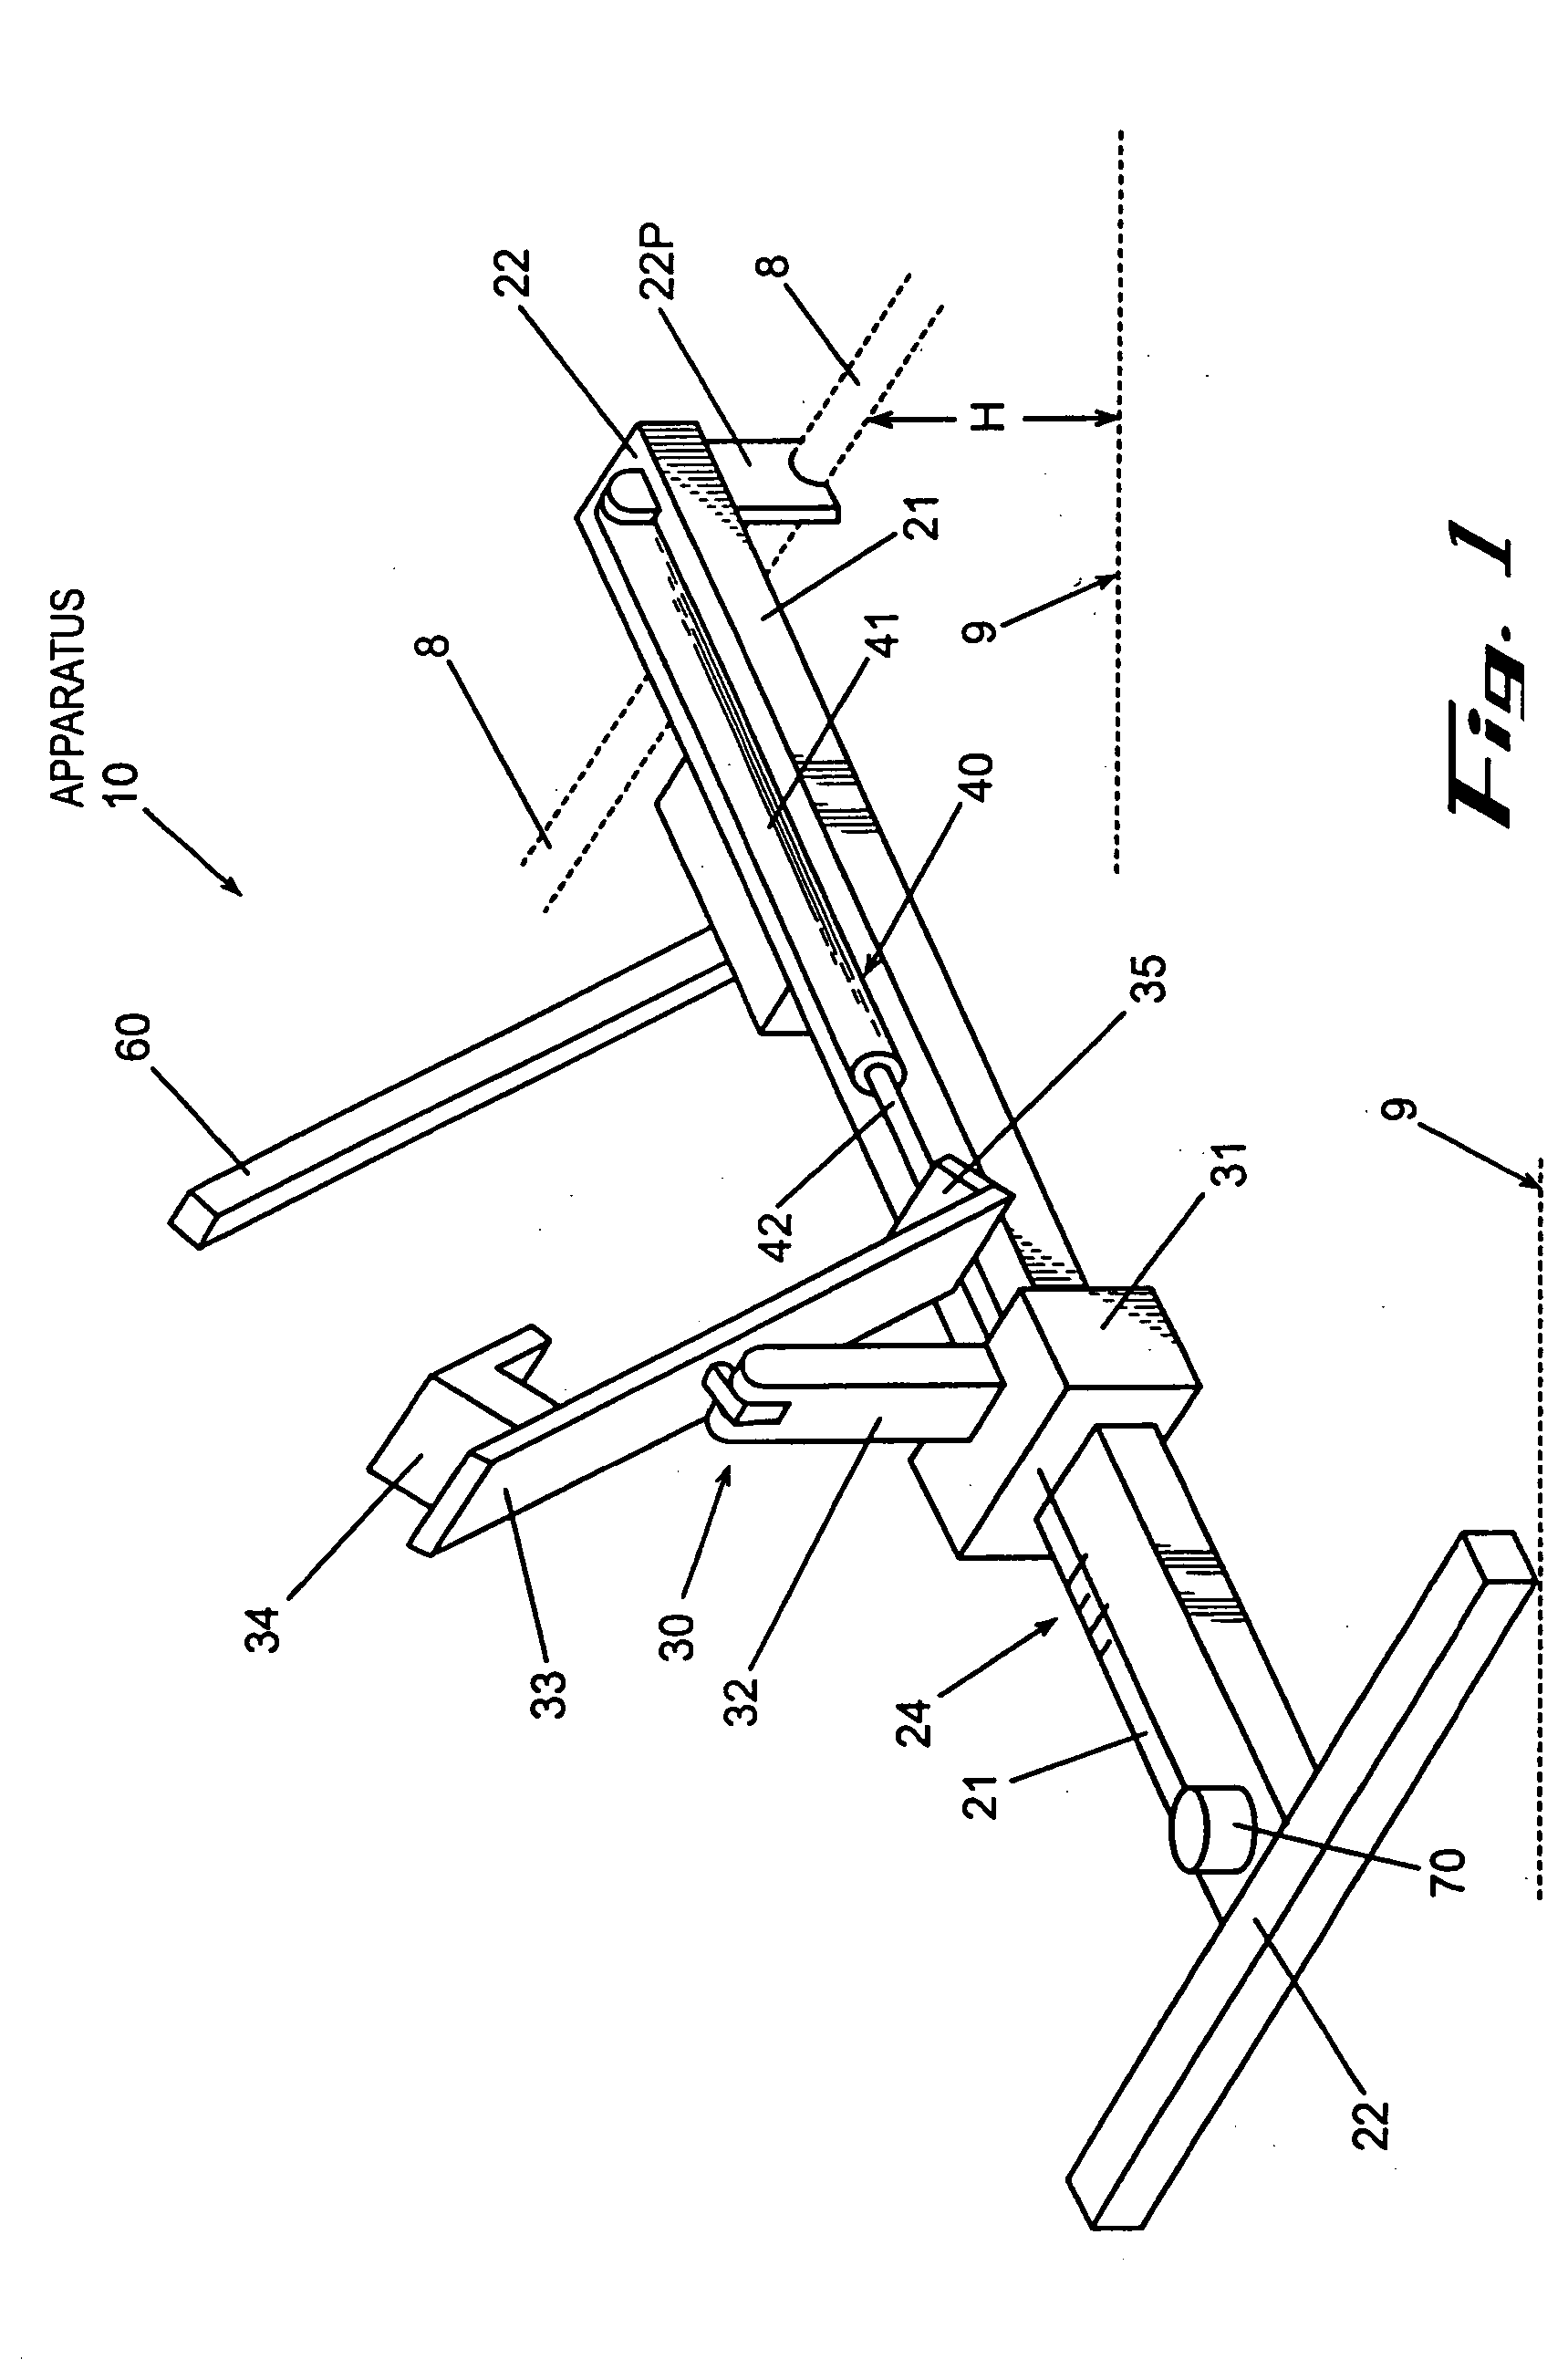 Apparatus for enabling the movement of human limbs and method for using same